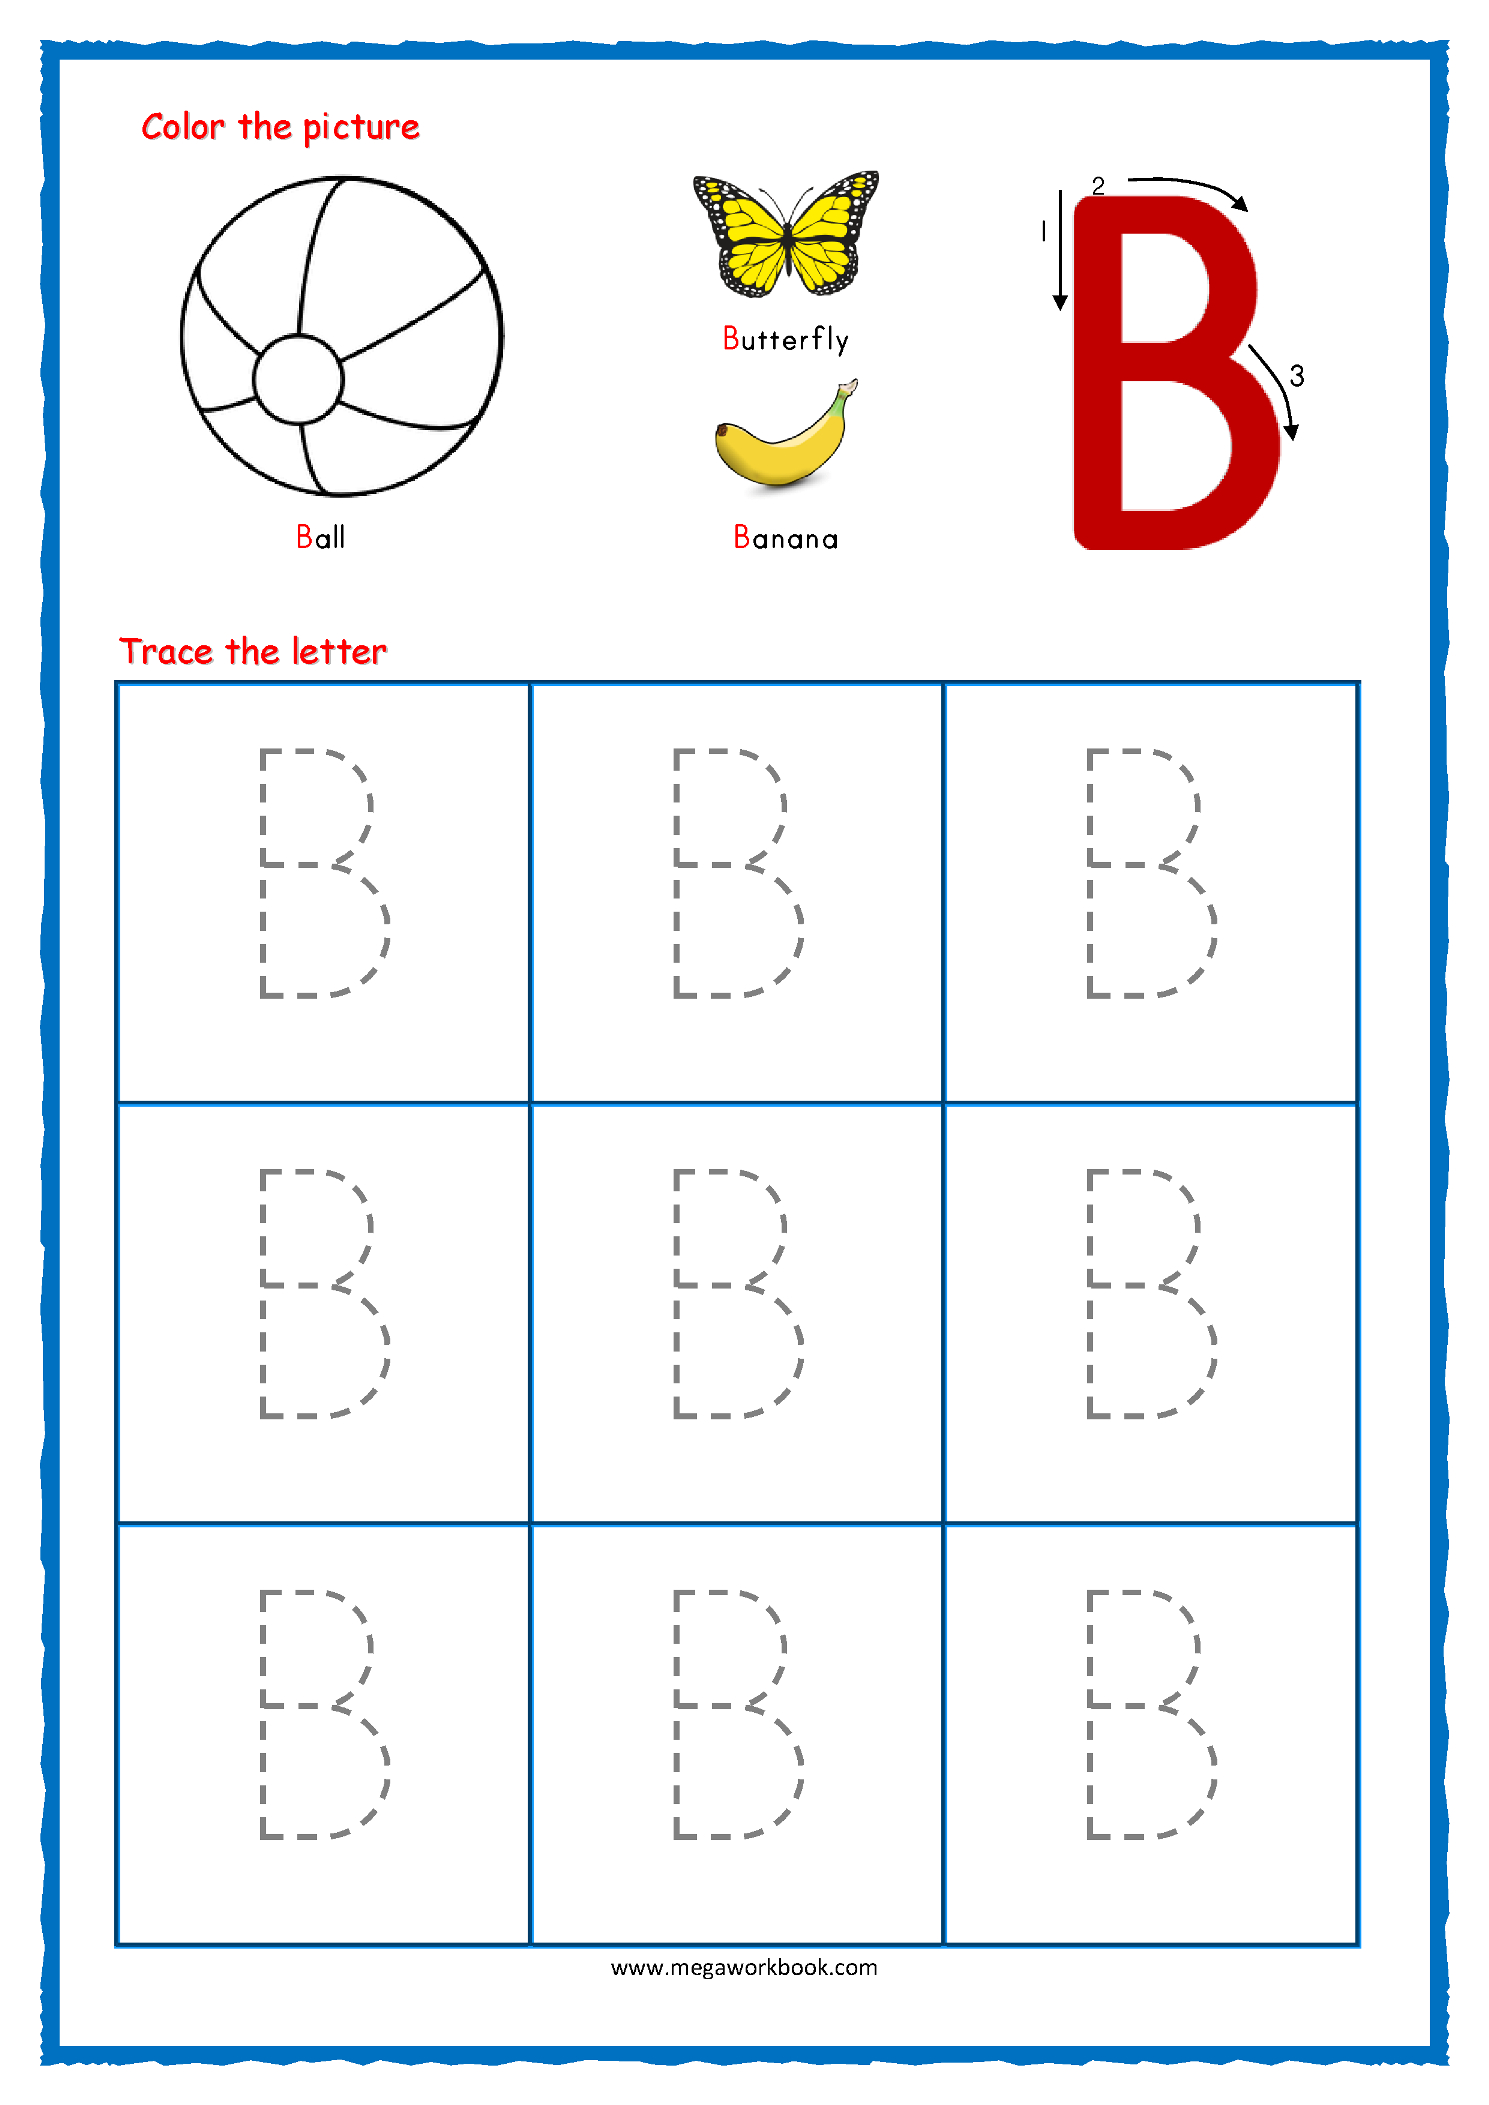 Coloring Book : Letter Tracingts Free Printable Coloring within I Letter Tracing Worksheet